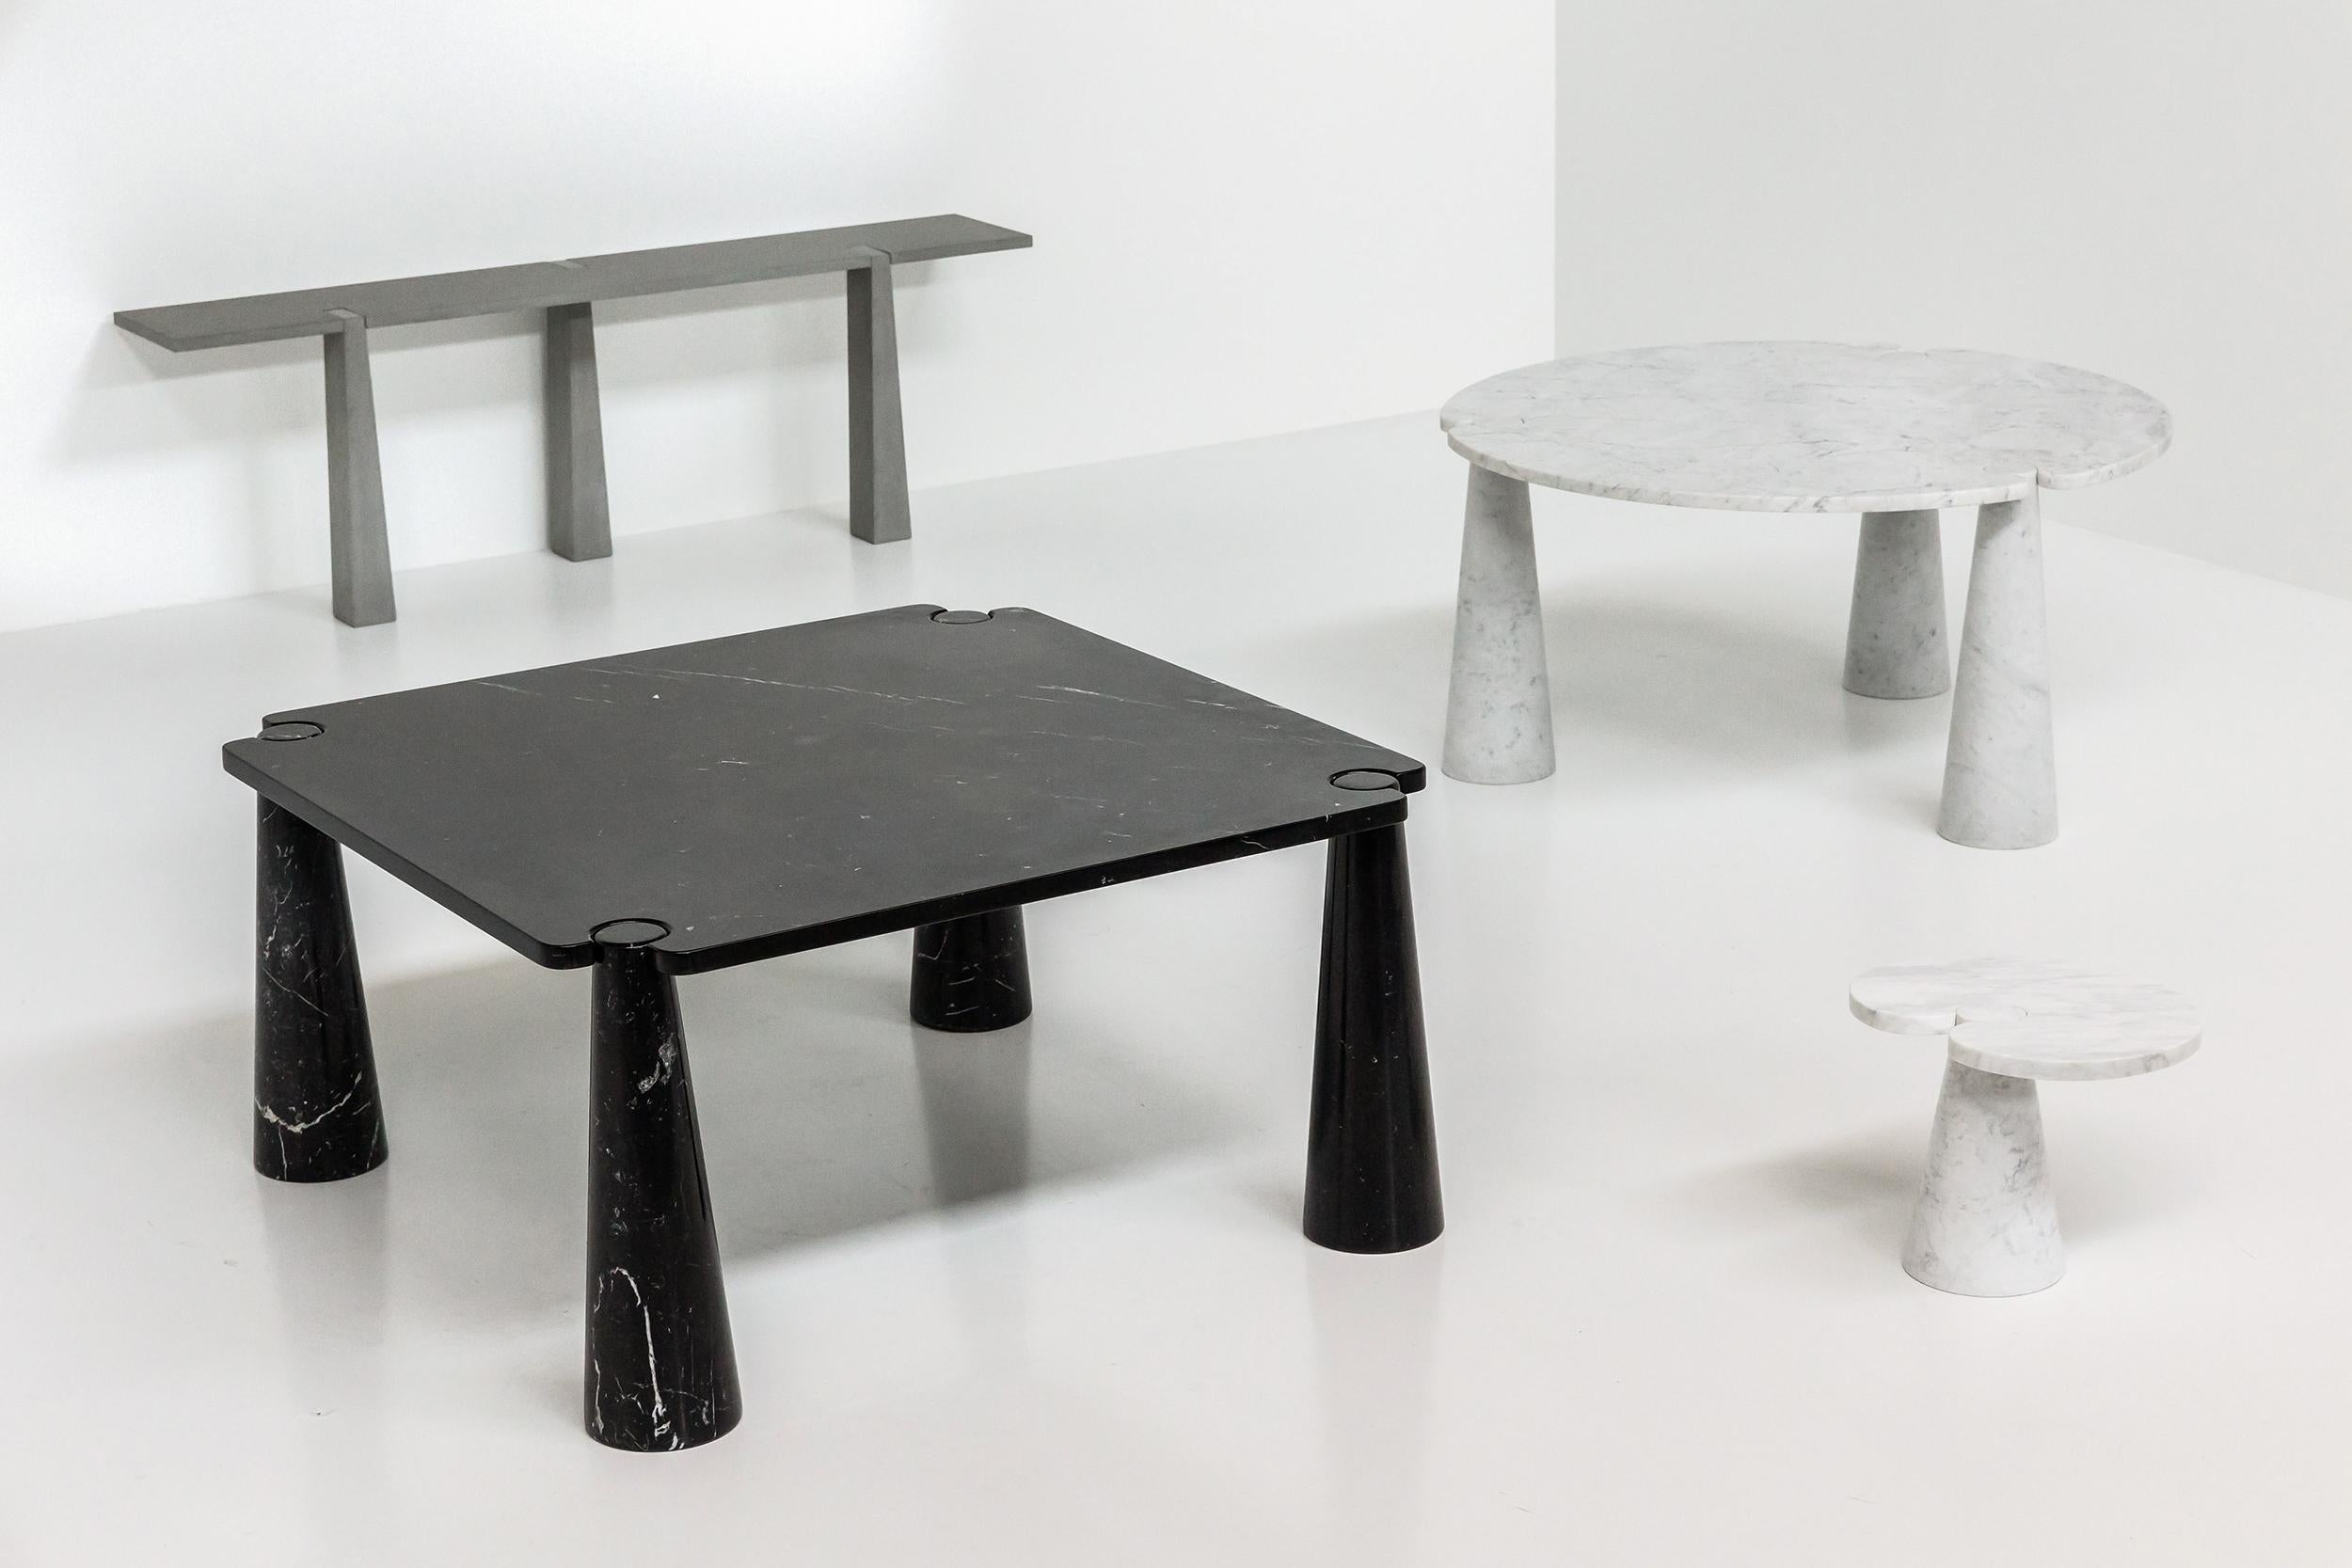 Mangiarotti 'Eros' Square Marble Dining Table, Italy, Post-Modern, 1970's For Sale 6